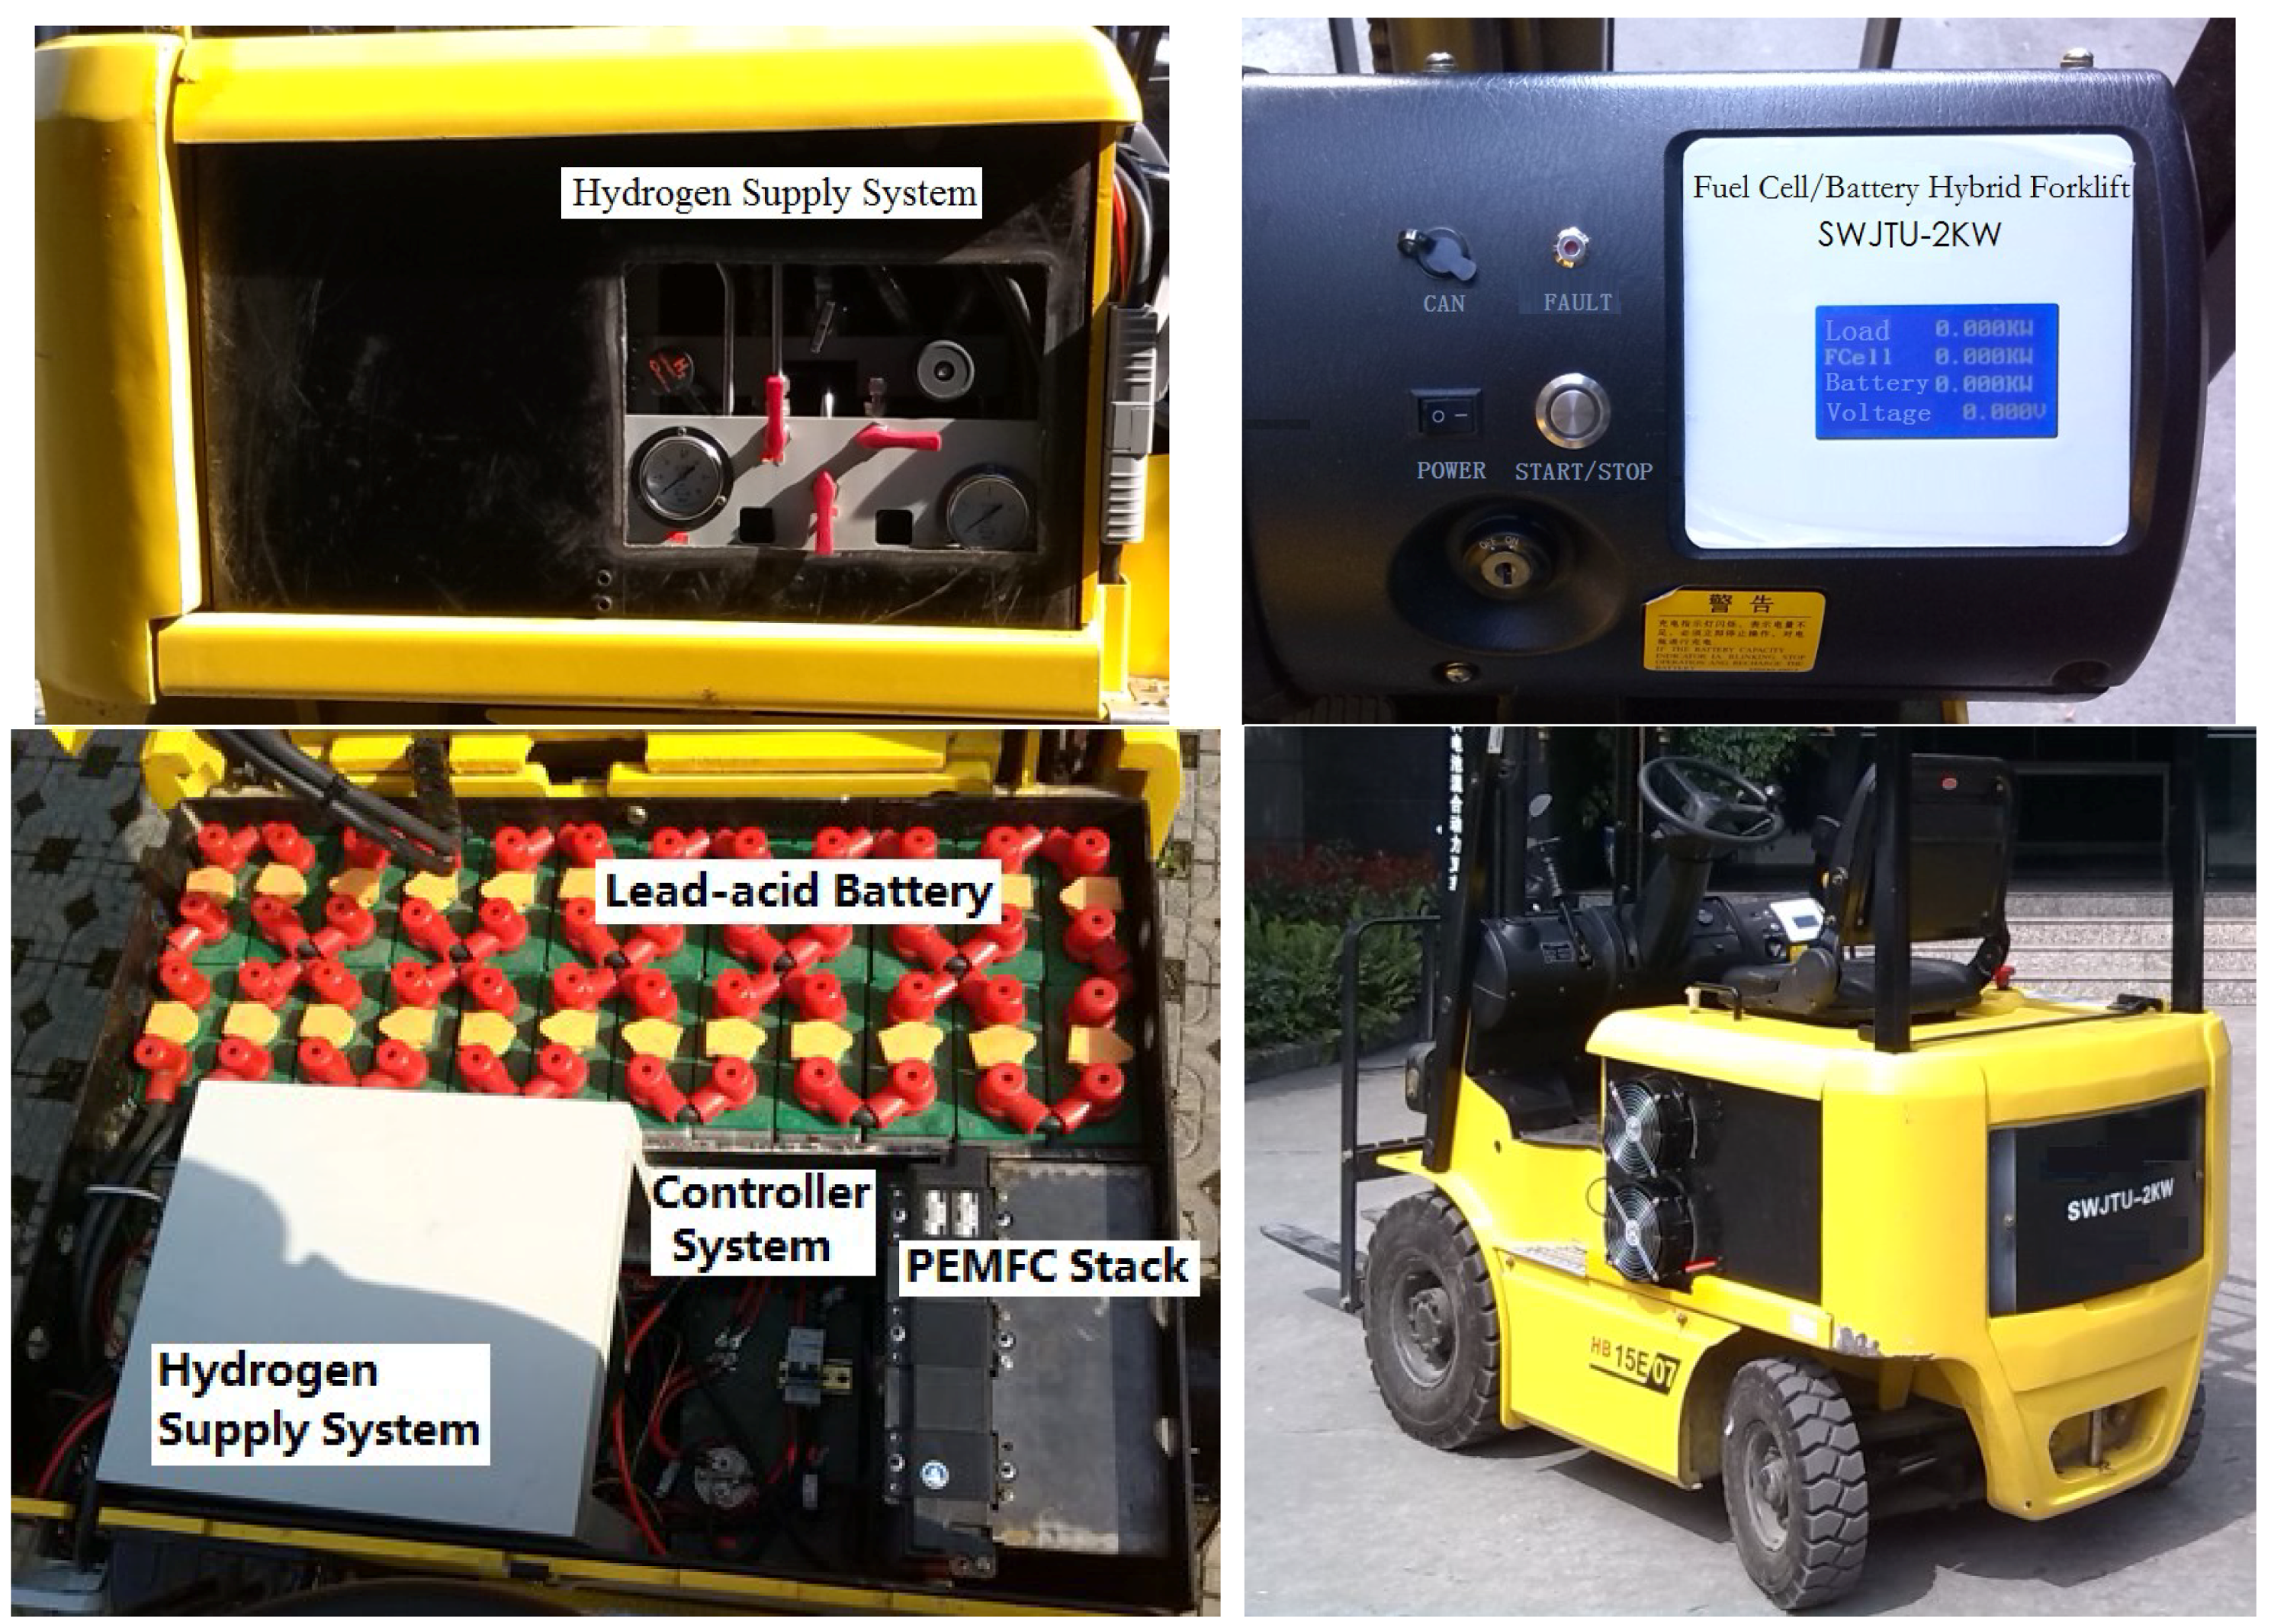 Energies Free Full Text System Design And Energy Management For A Fuel Cell Battery Hybrid Forklift Html